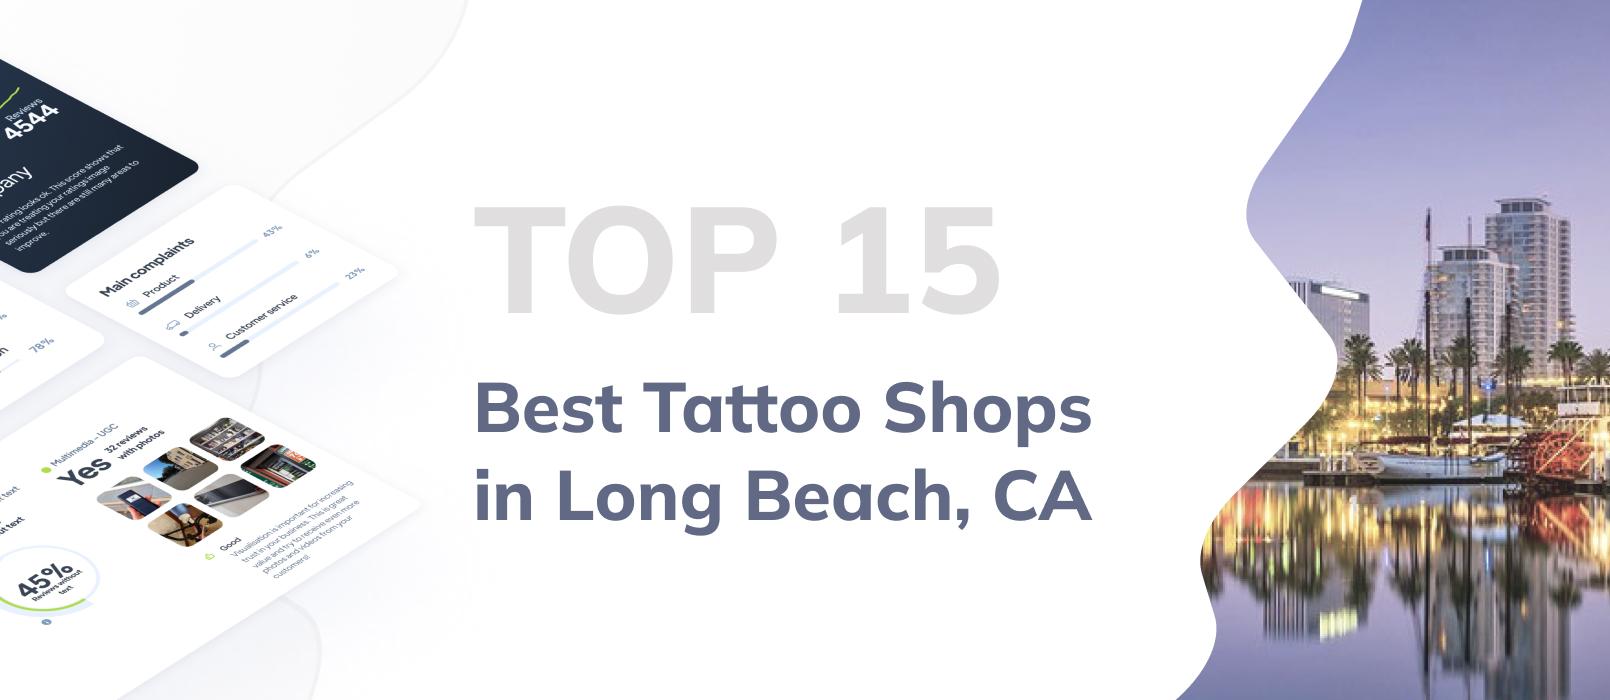 Best Tattoo Shops in Long Beach, CA: 15 Top-Rated Long Beach Tattoo Shops